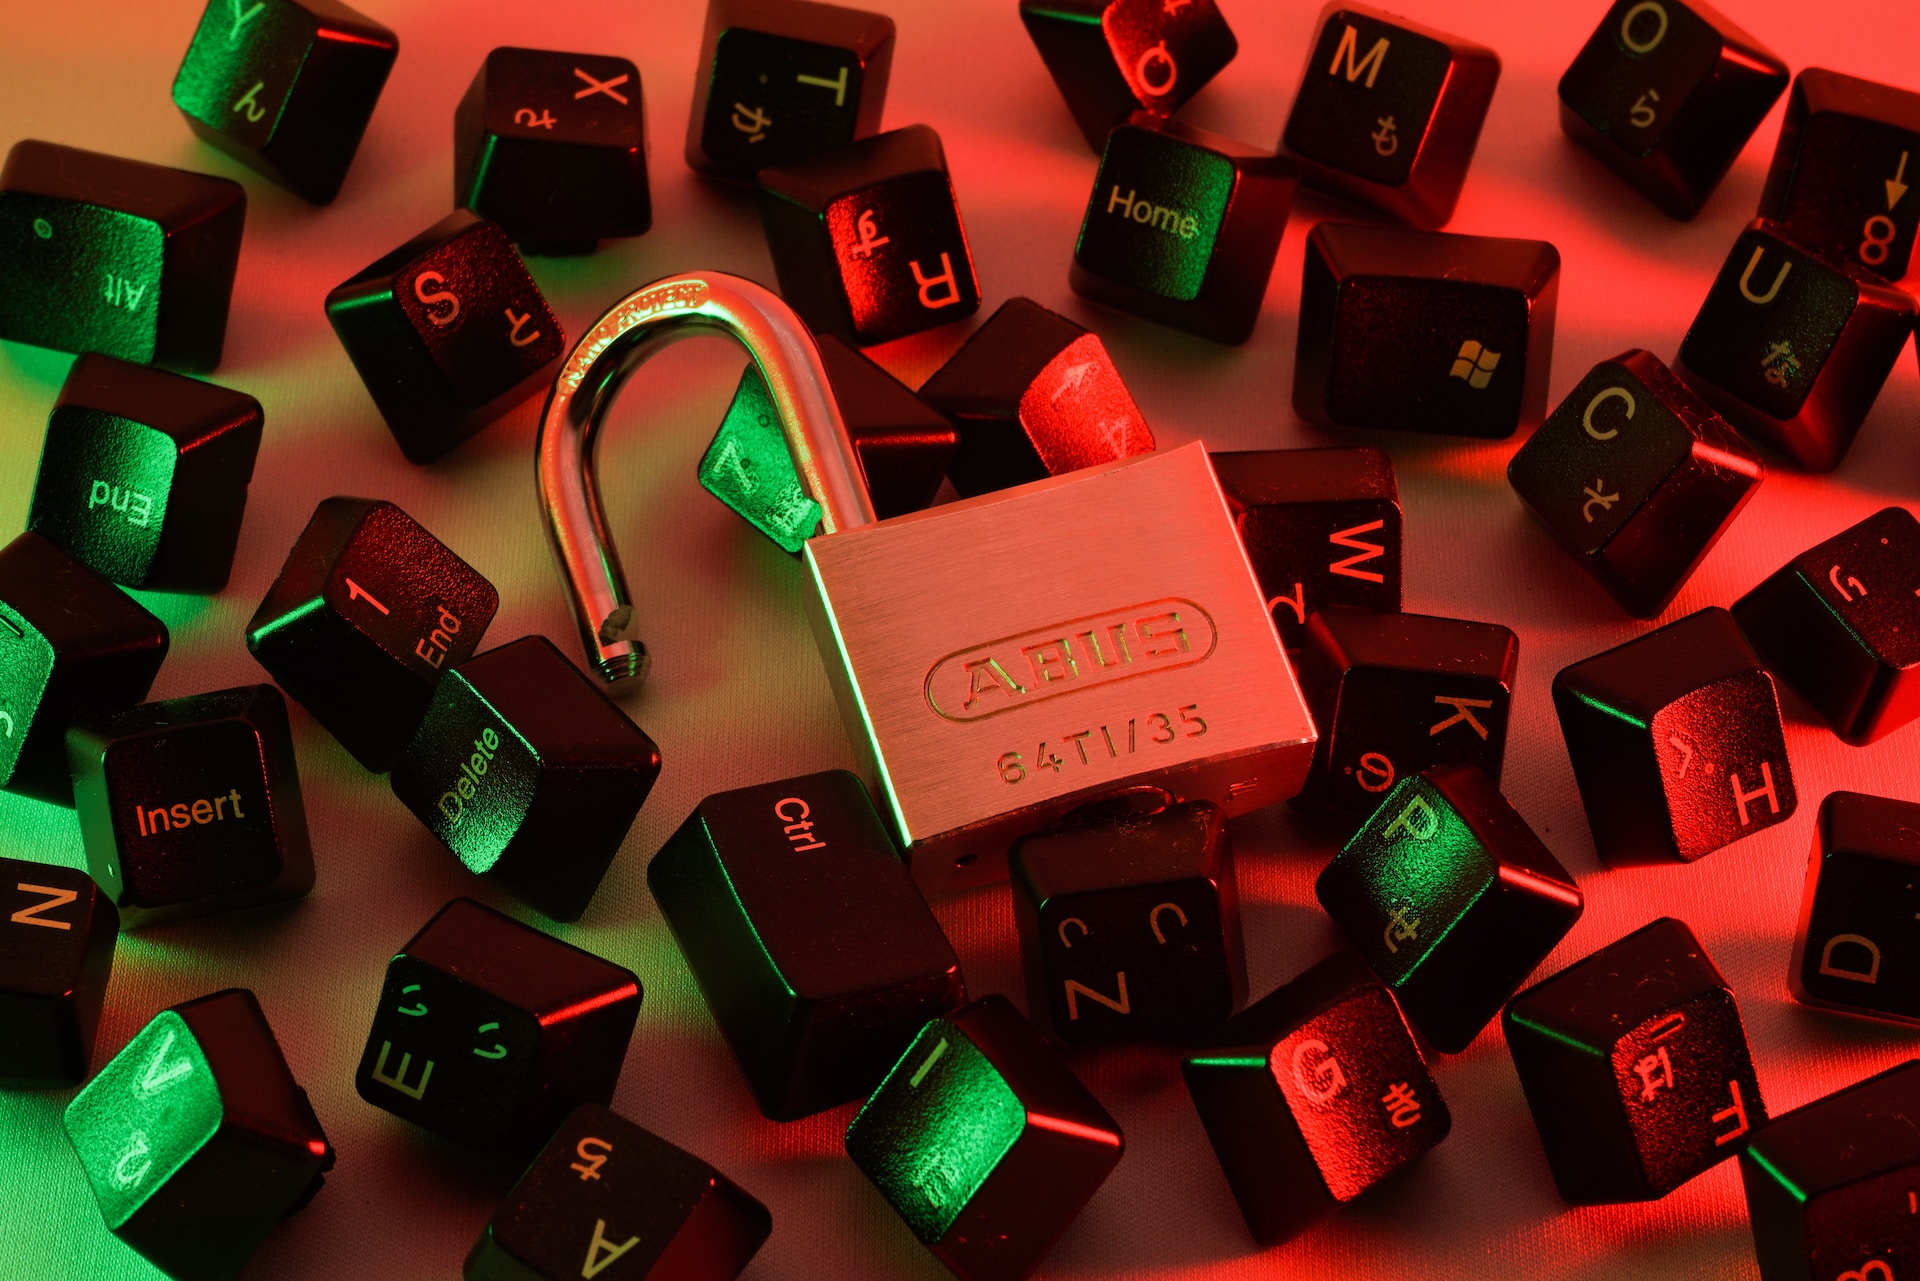 An image of an open padlock, surrounded by computer keyboard keys.  The scene is cast in a reddish light. Photo by FLY:D on Unsplash